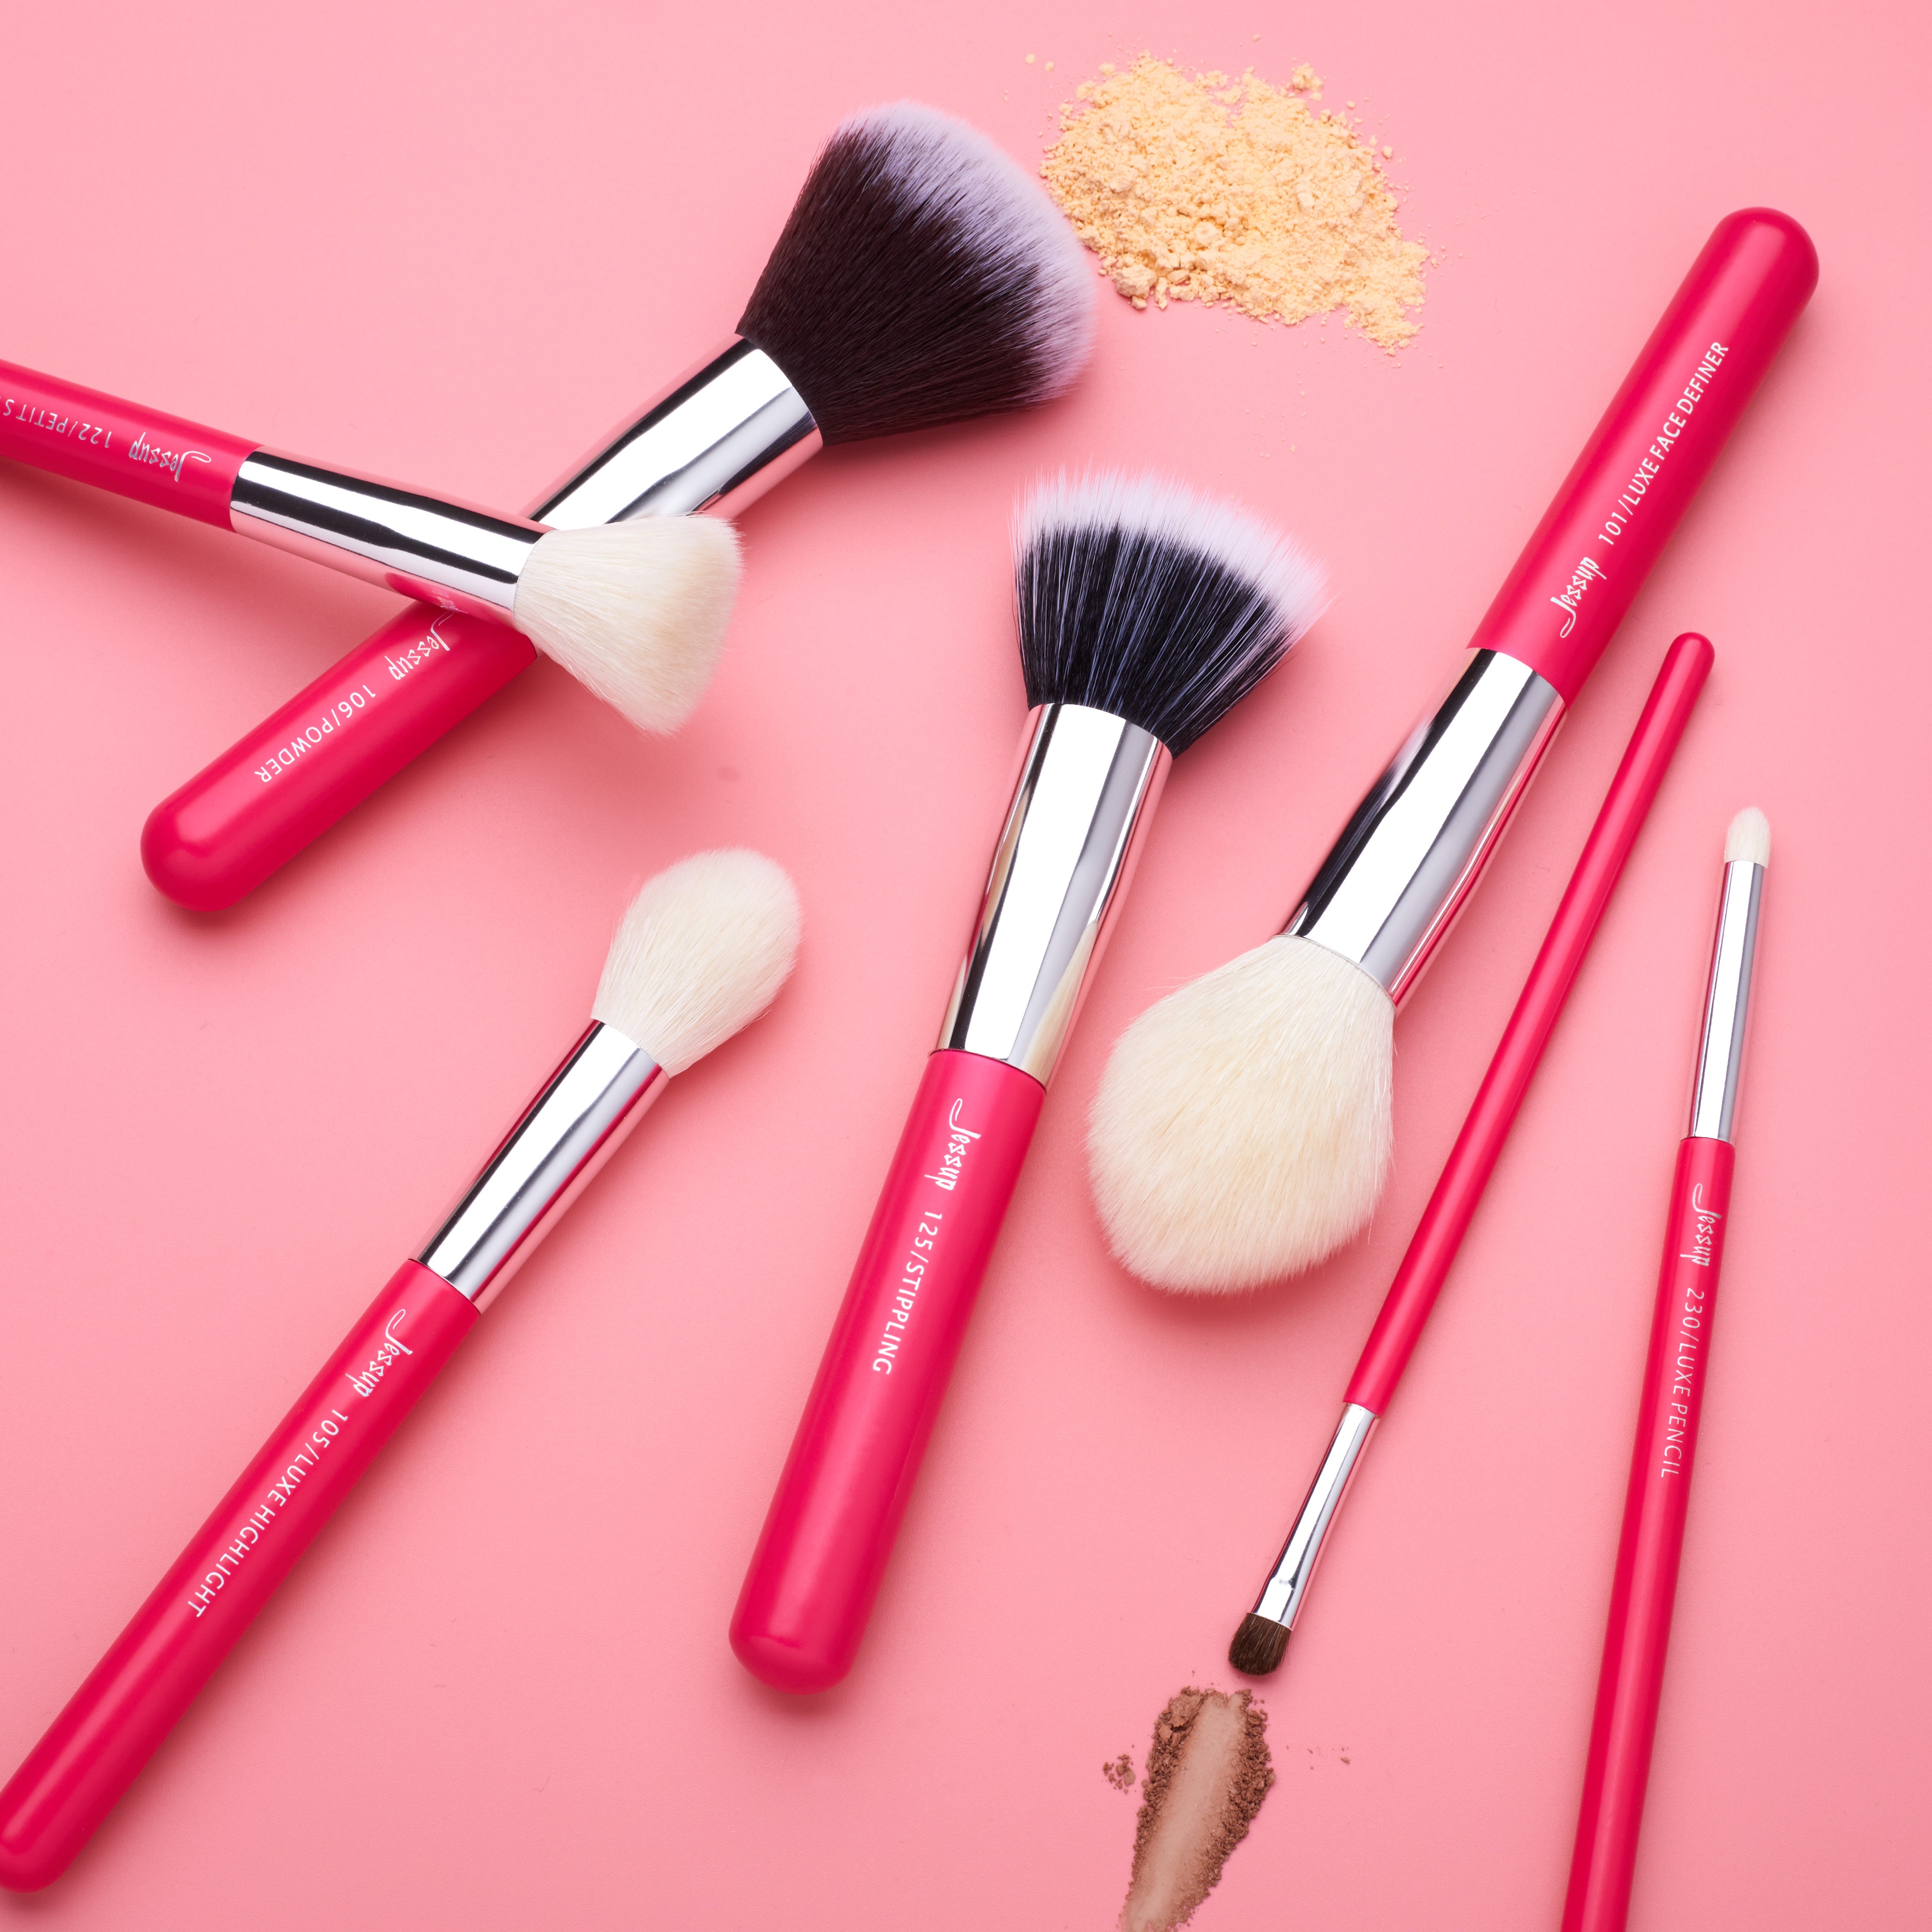 Affordable Makeup Brush Sets Teens will Love - The Children's Planner